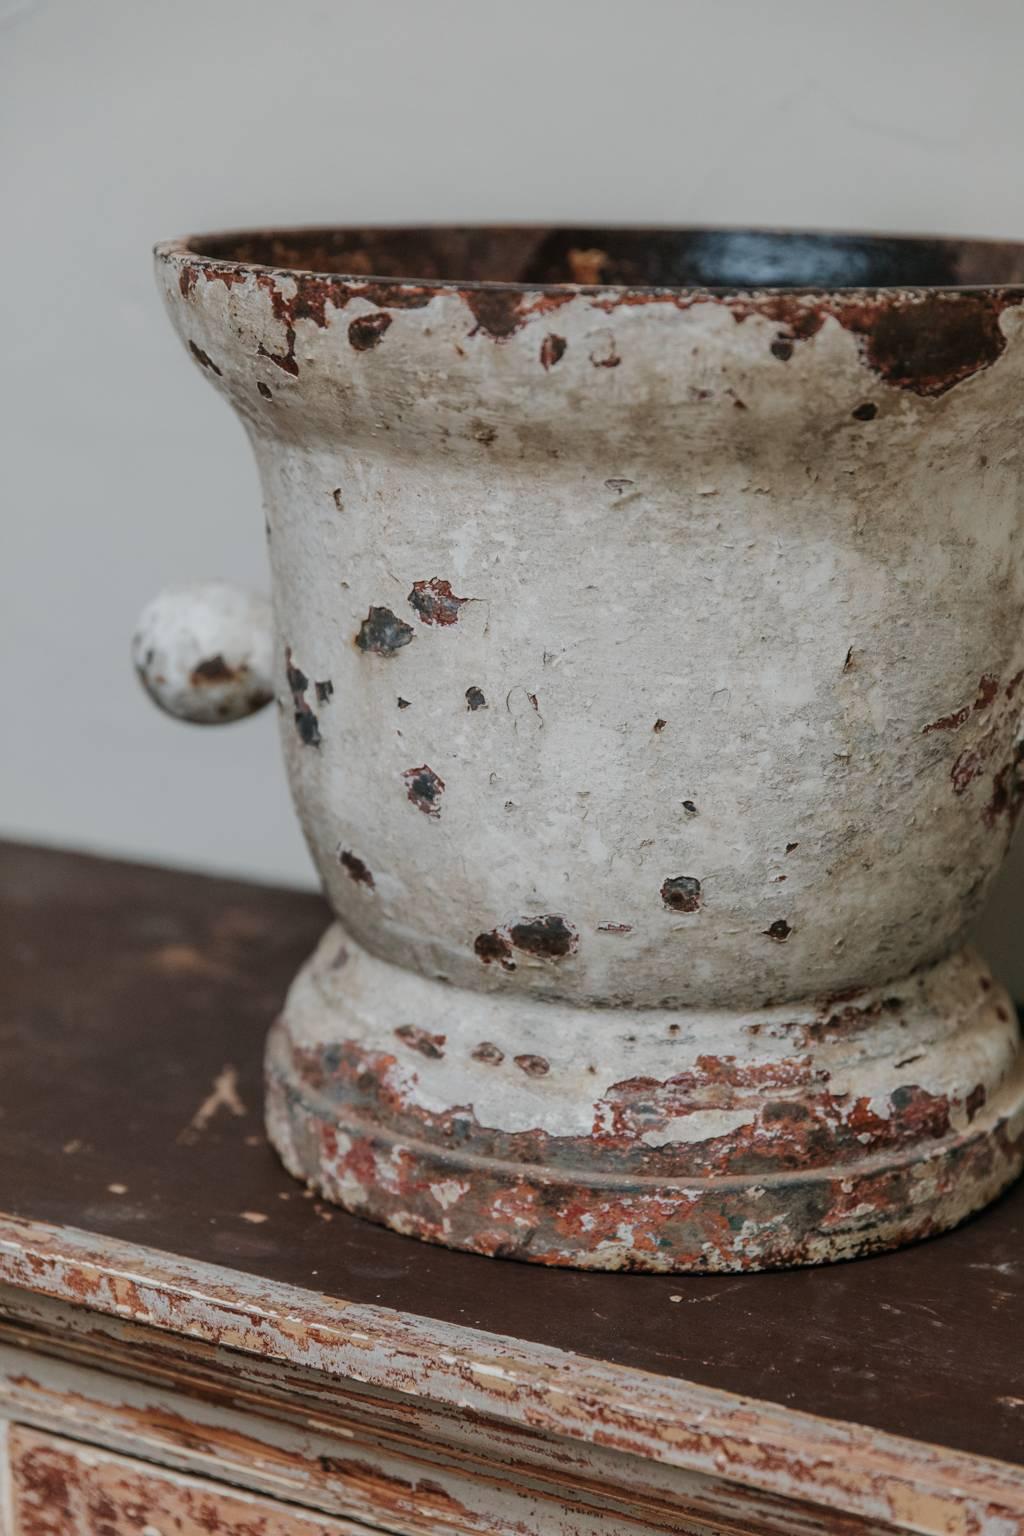 This is a cast iron mortar, with rests of old paint, very charming object, indoors as well as outdoors.